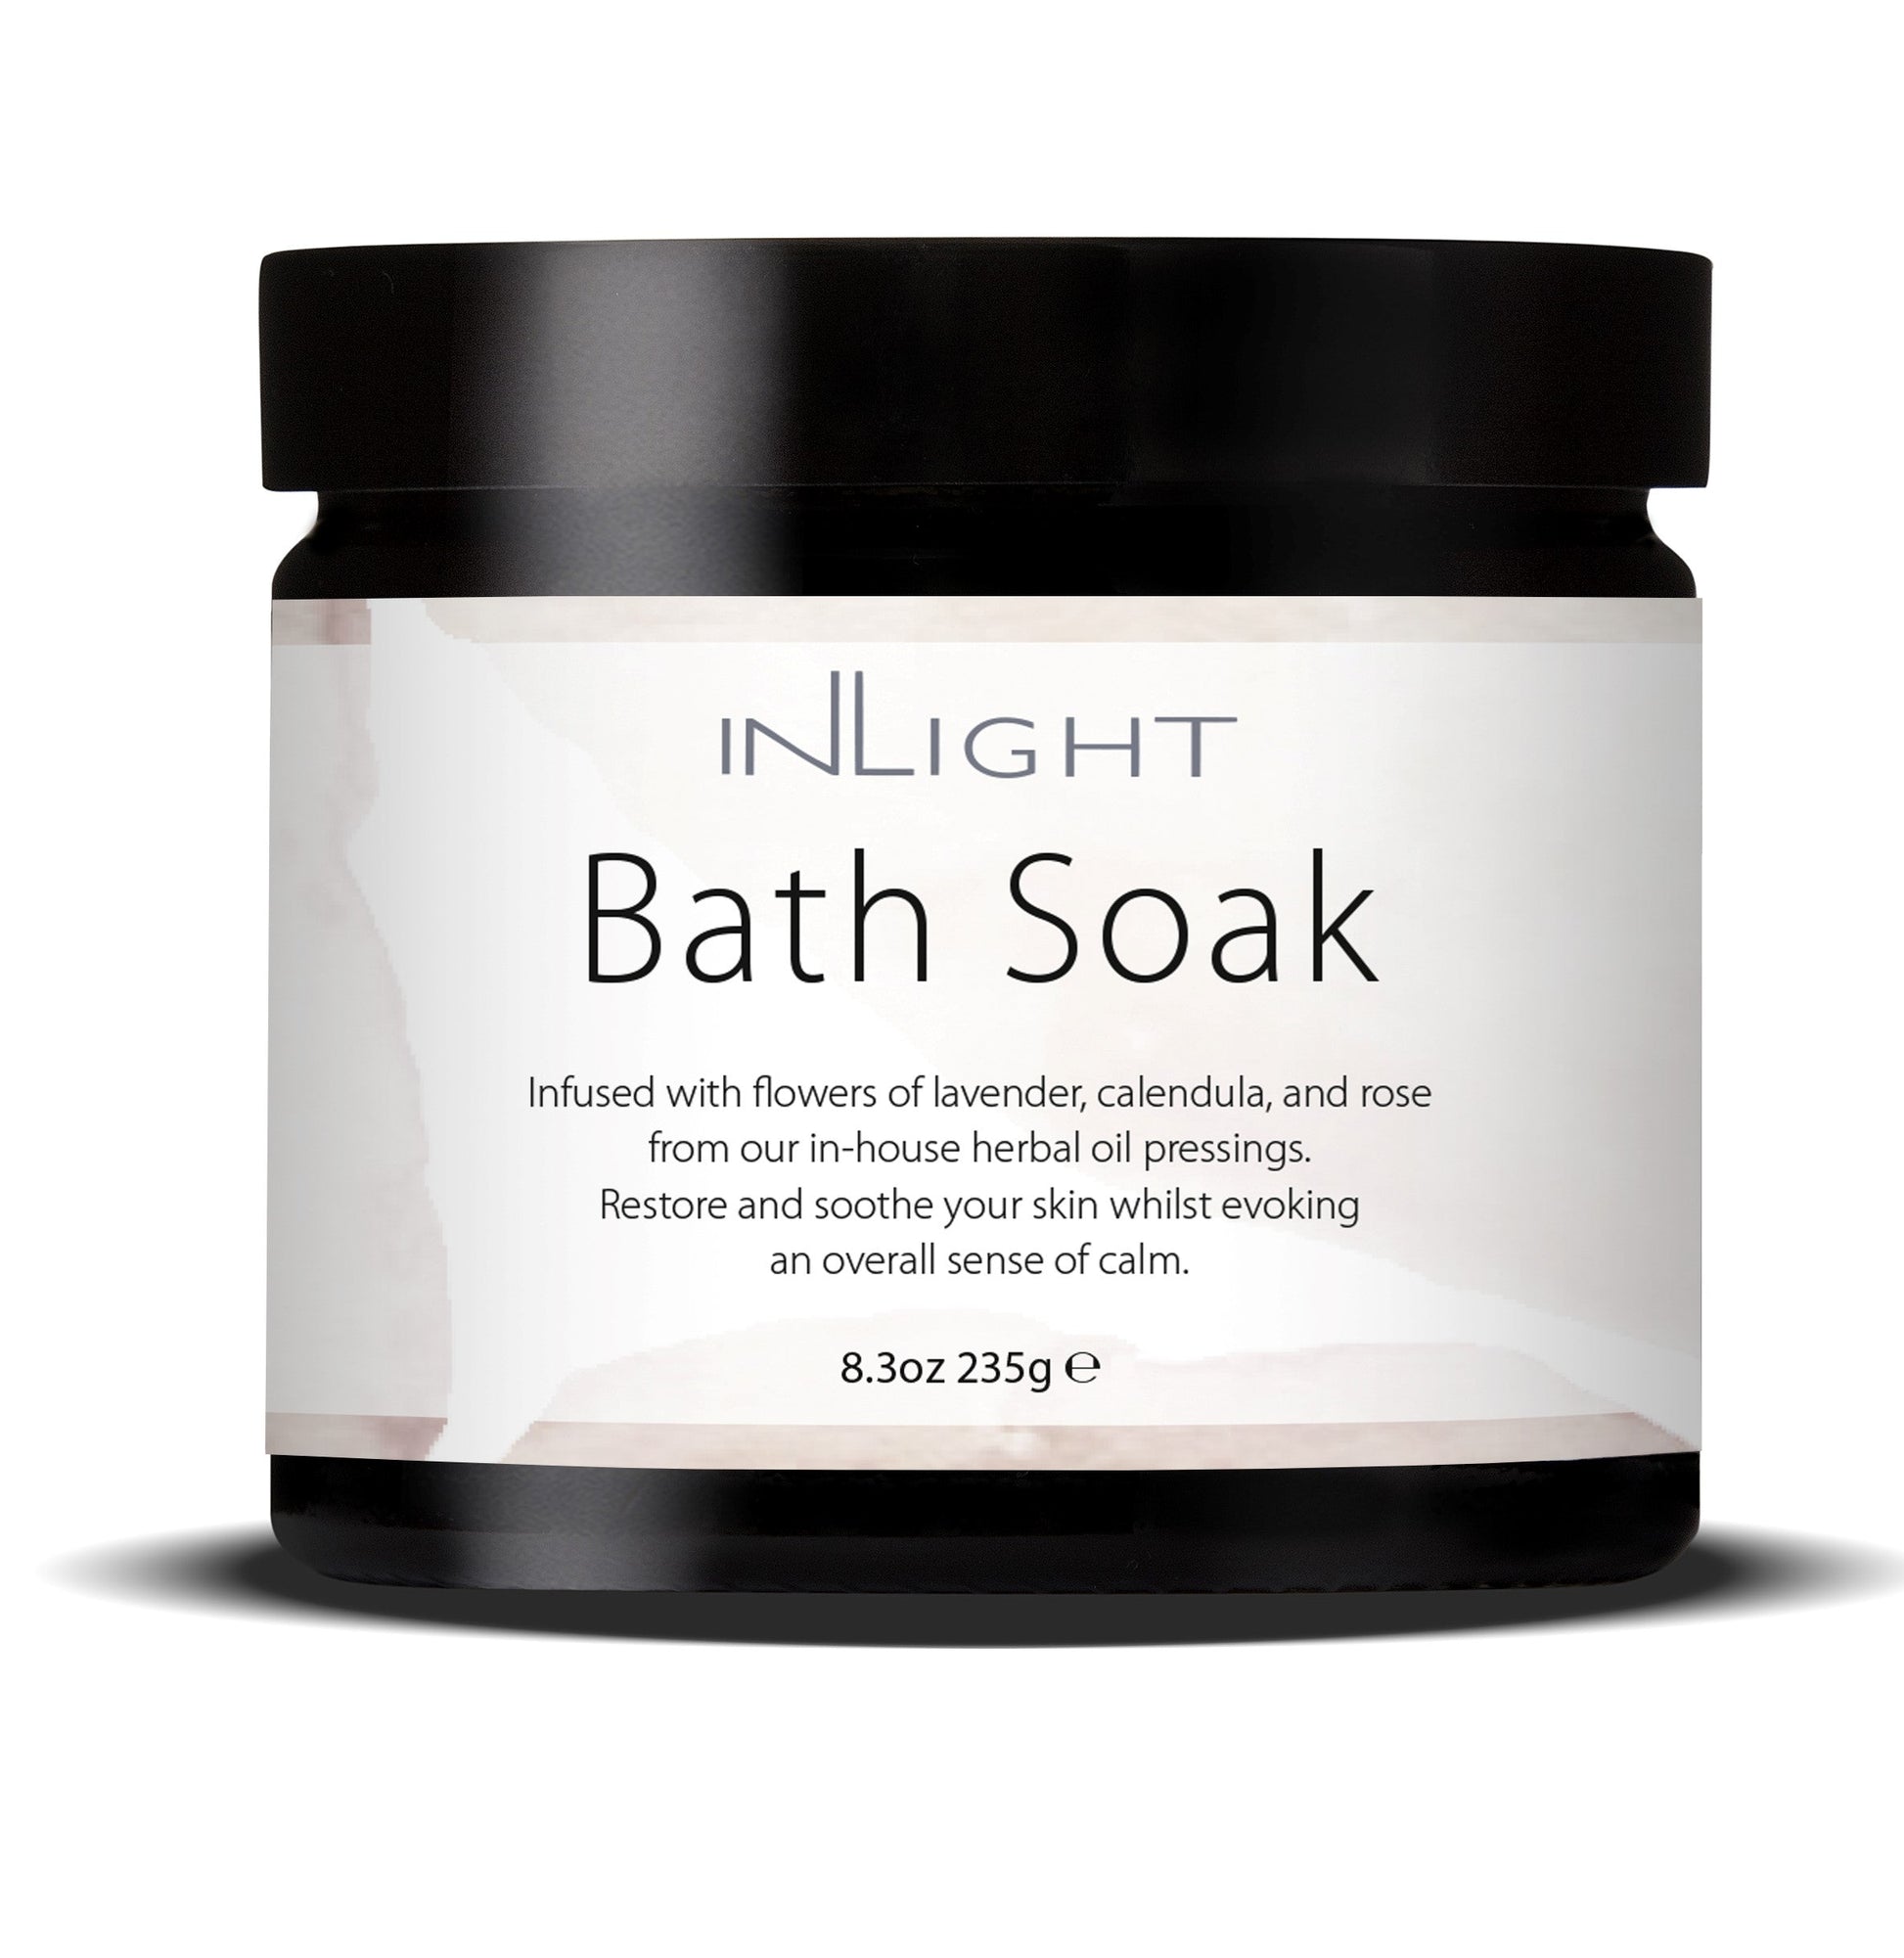 photo of inlight beauty bath soak in a black jar with black plastic lid and pinky white label which reads 'inlight bath soak infused with flowers of lavender, calendula and rose from our in-house herbal oil pressings. restore and soothe your skin whilst evoking an overall sense of calm'